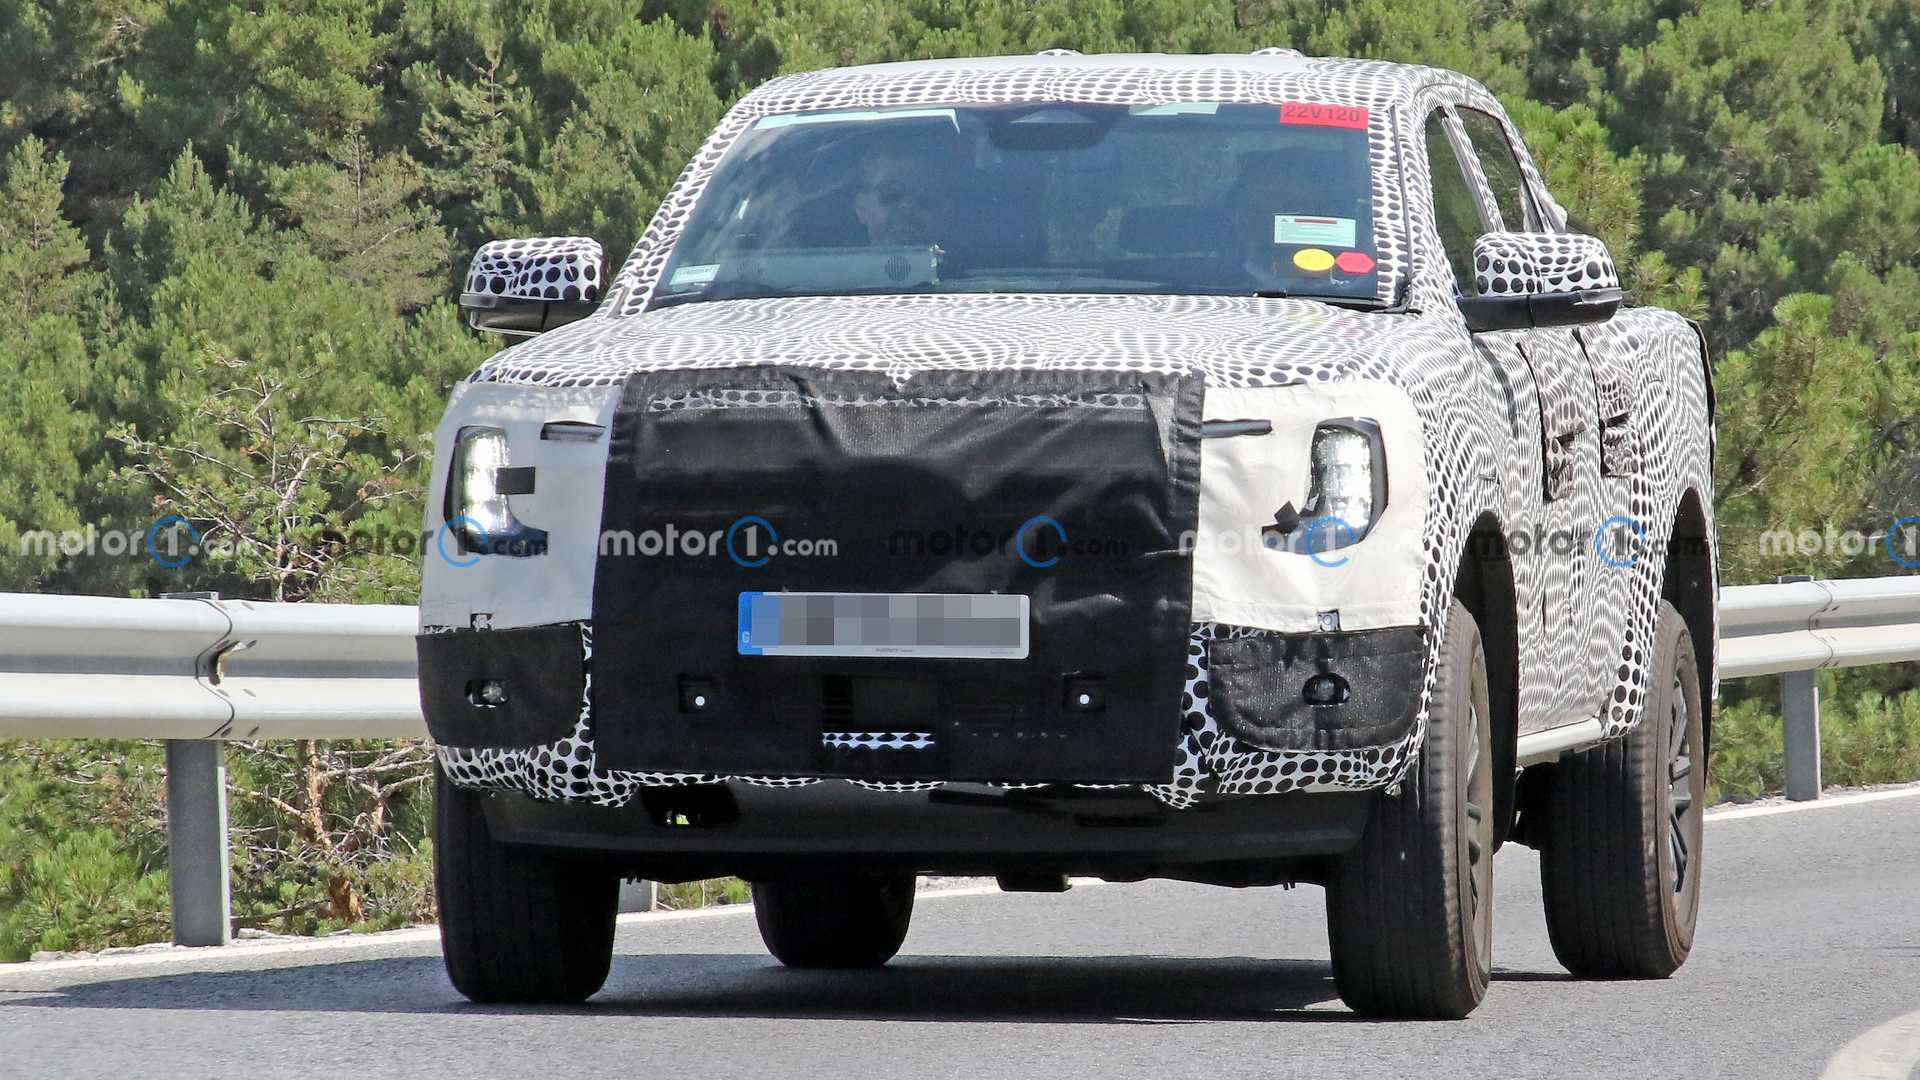 2023-ford-ranger-front-view-spy-photo (1).jpg